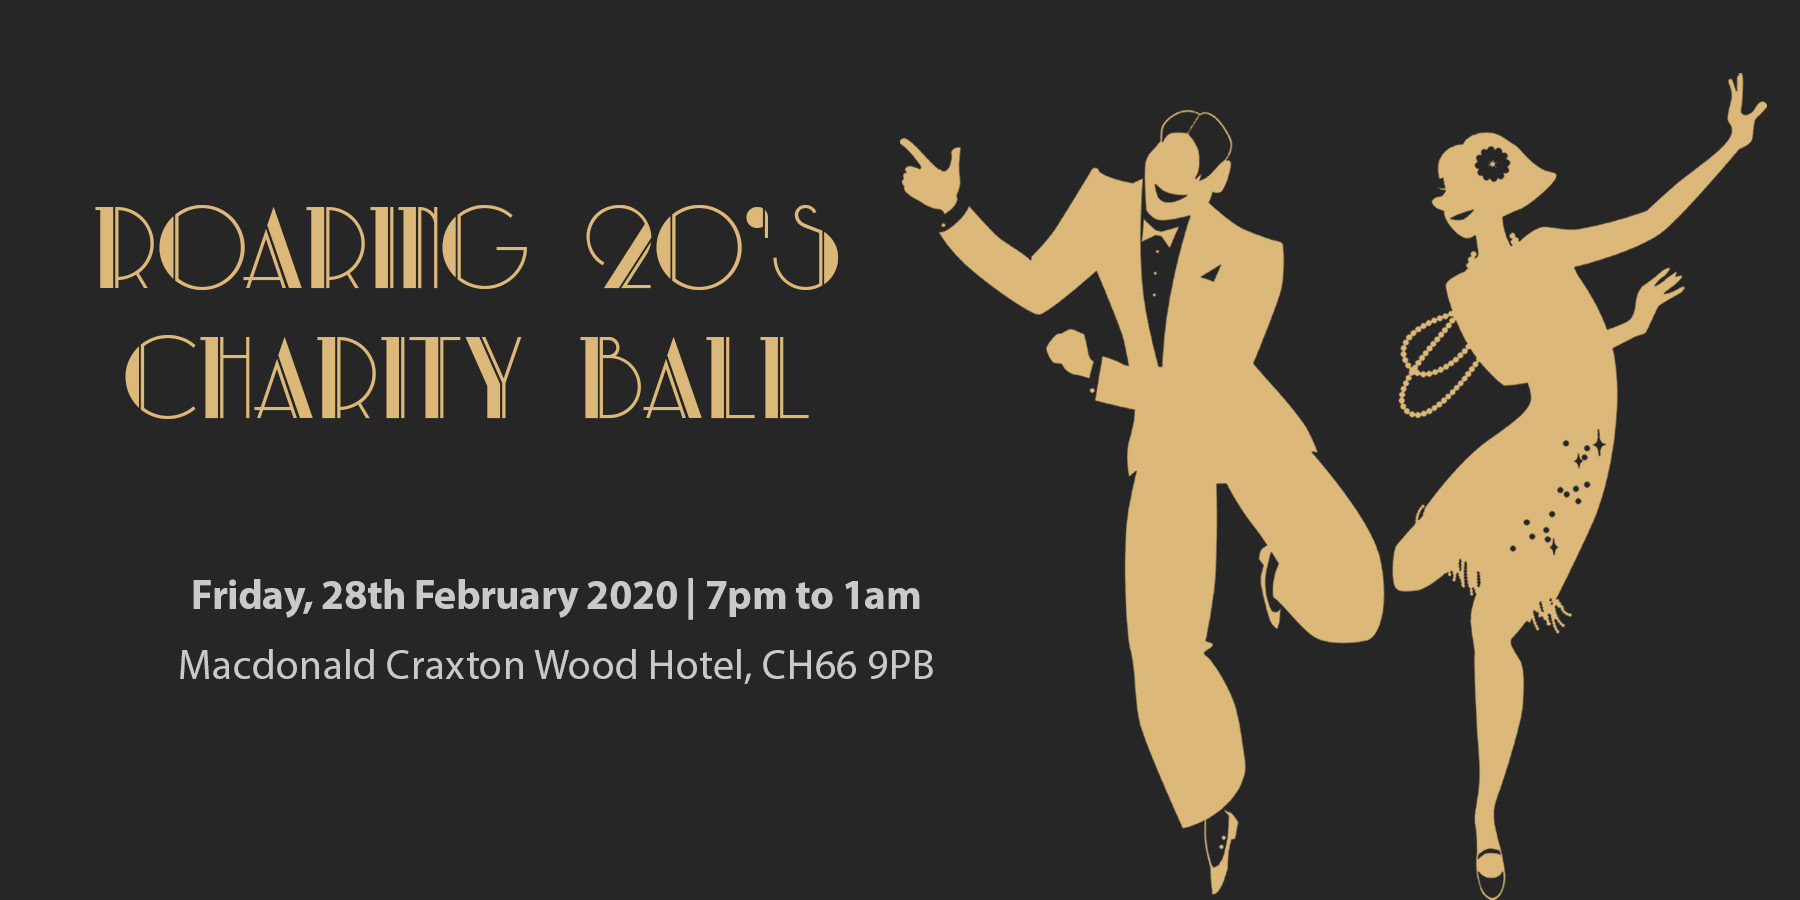 A graphic of two 1920s characters dancing alongside the text 'Roaring 20s Charity Ball, Friday 28th February 2020, 7pm to 1am'